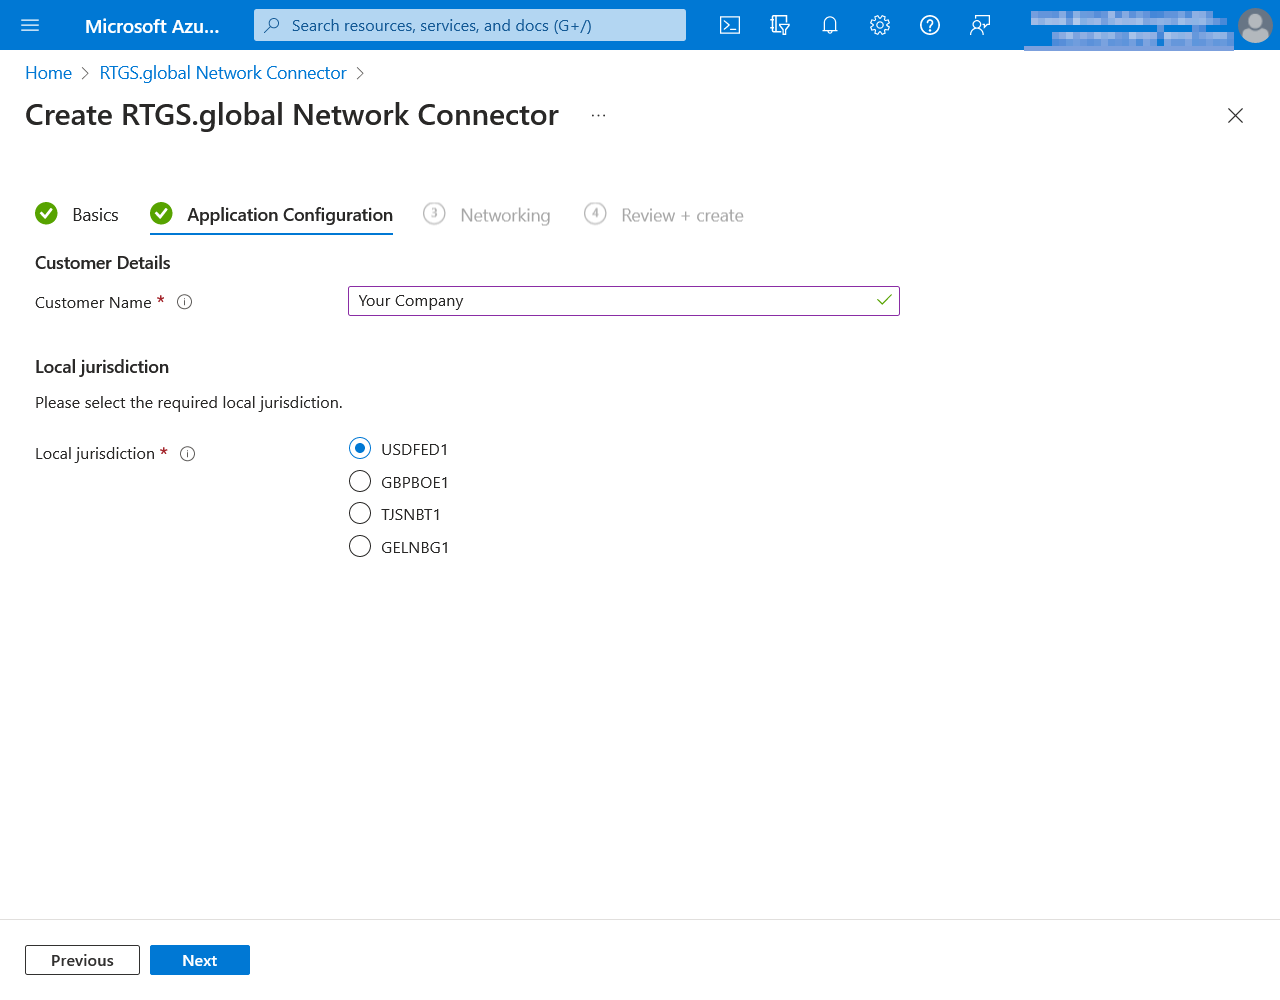 Image showing the third step of the RTGS.global Network Connector deployment wizard